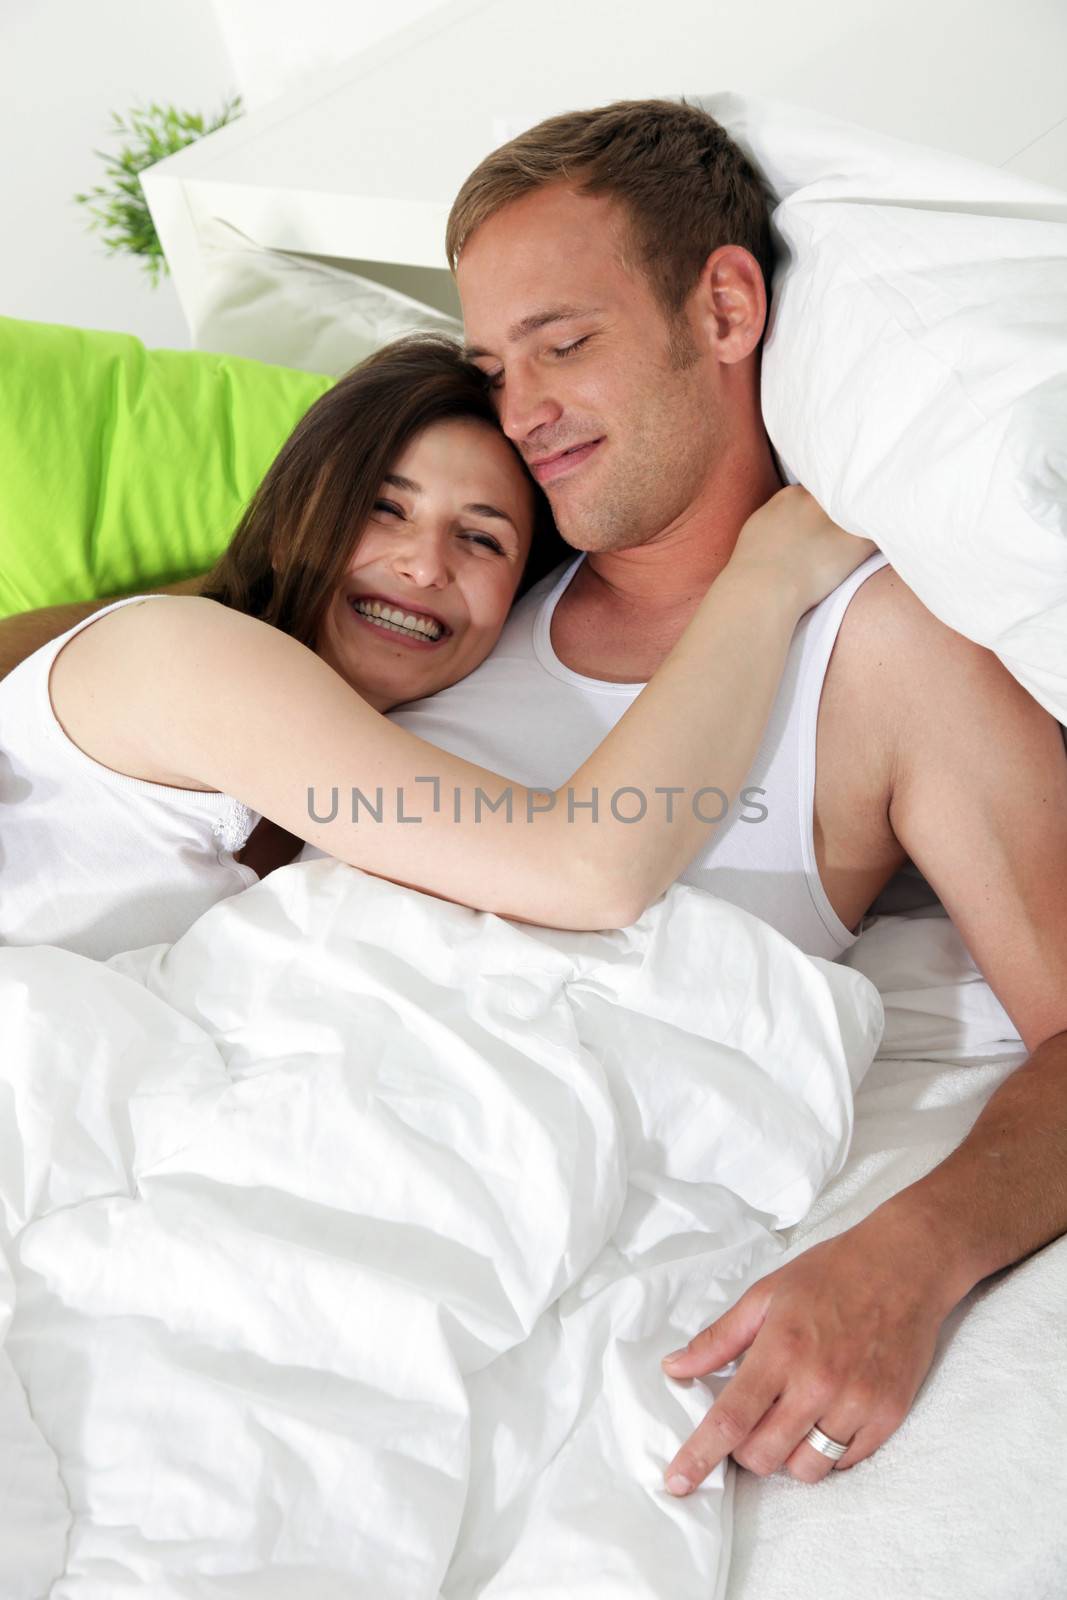 Smiling woman cuddling her husband in bed by Farina6000